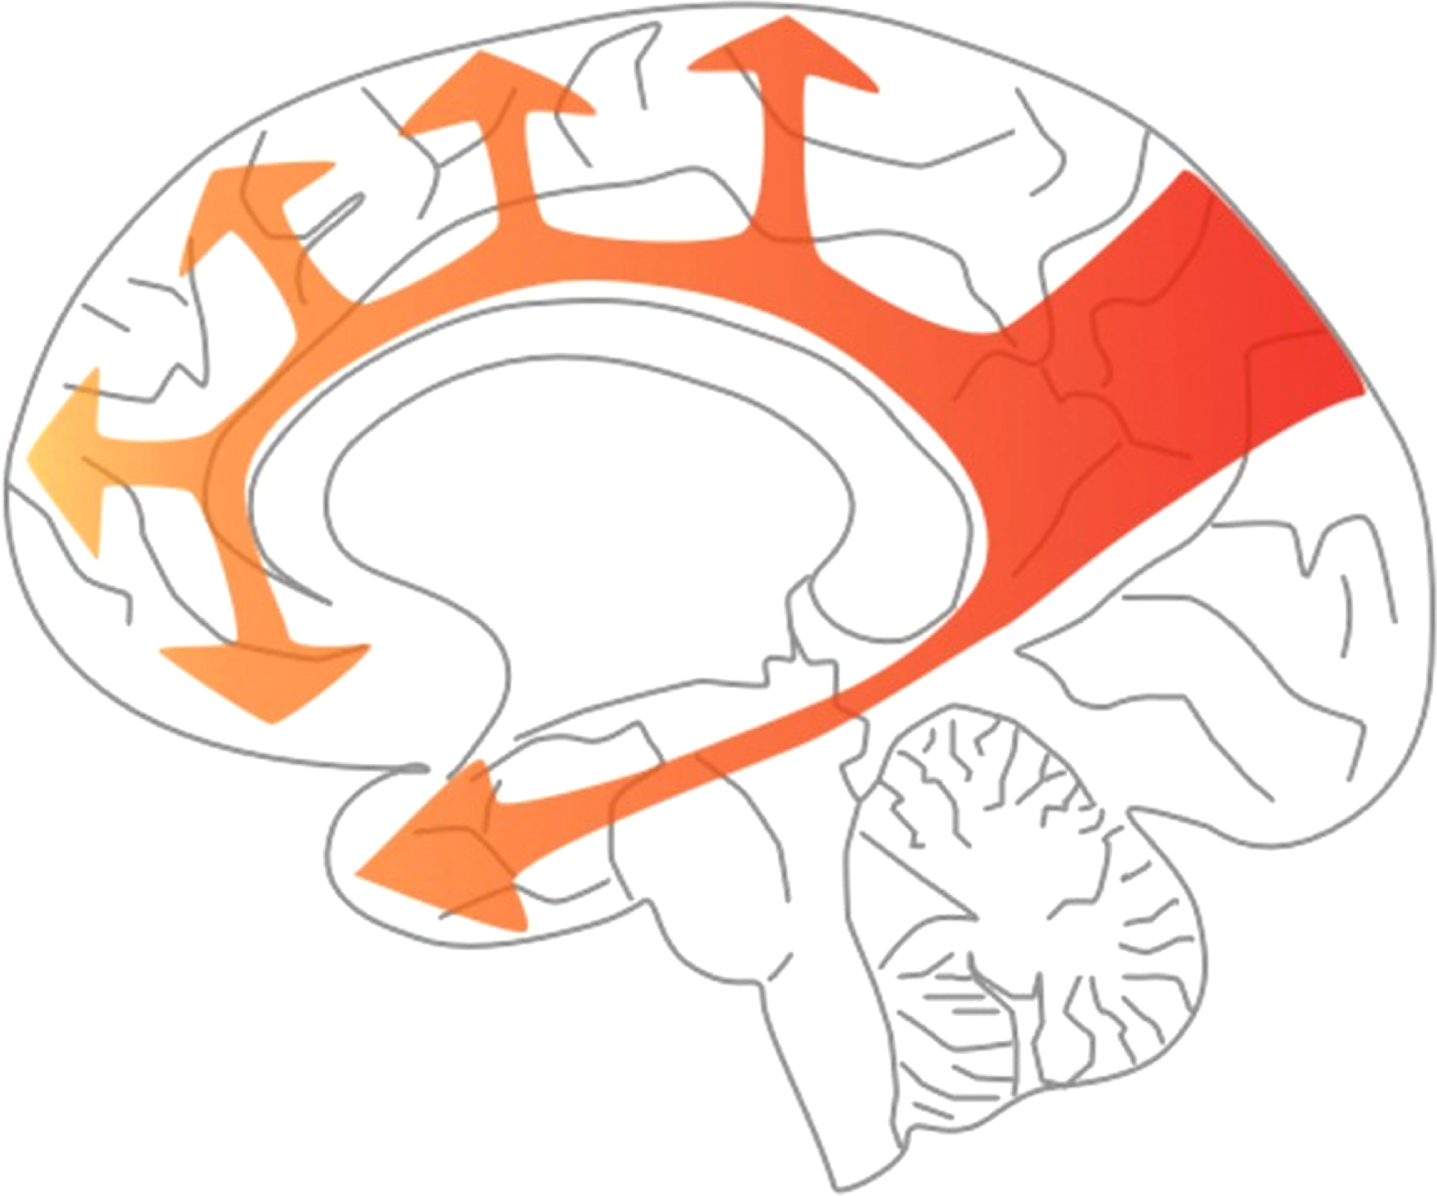 Stereotyped pattern of spread of hypoperfusion in AD. The arrows in this diagram indicate the progression of hypoperfusion, starting from the precuneus, well before the onset of dementia, and spreading to the rest of the parietal cortex and the cingulate gyrus, then the frontal and temporal cortex, largely sparing the occipital cortex until late disease. (This figure was originally published by Love et al. [18] and is distributed under the terms of the Creative Commons Attribution 4.0 International License (https://creativecommons.org/licenses/by/4.0/"). The figure was not modified.)